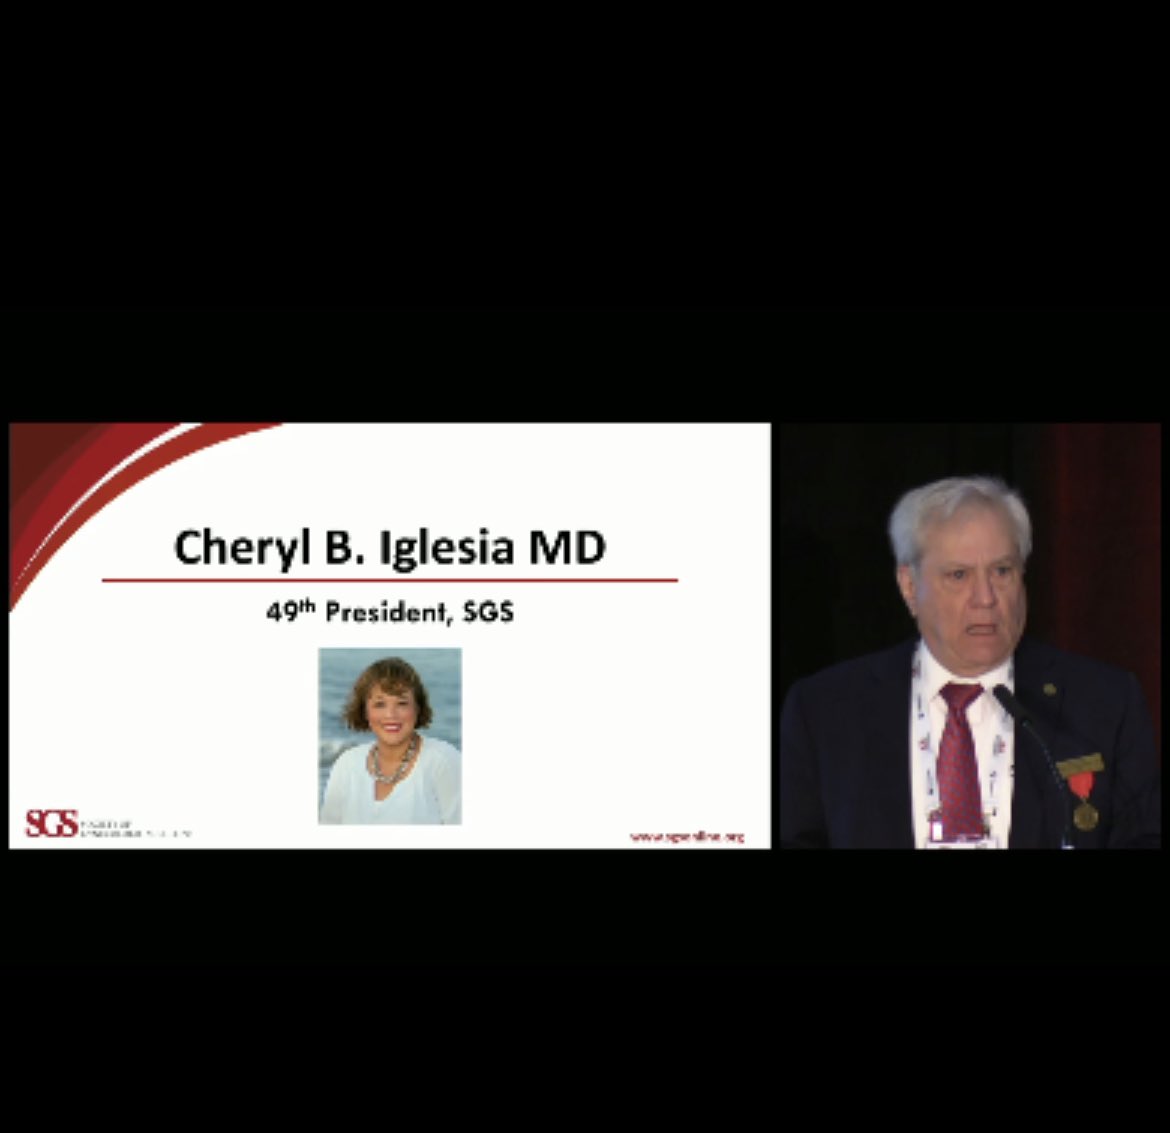 Here for this! @cheryliglesia is the true elevator, mentor, supporter, advocate, a bad ass power house doctor. I can say that as her previous resident who personally experienced her support, and now as her partner. @GynSurgery president!